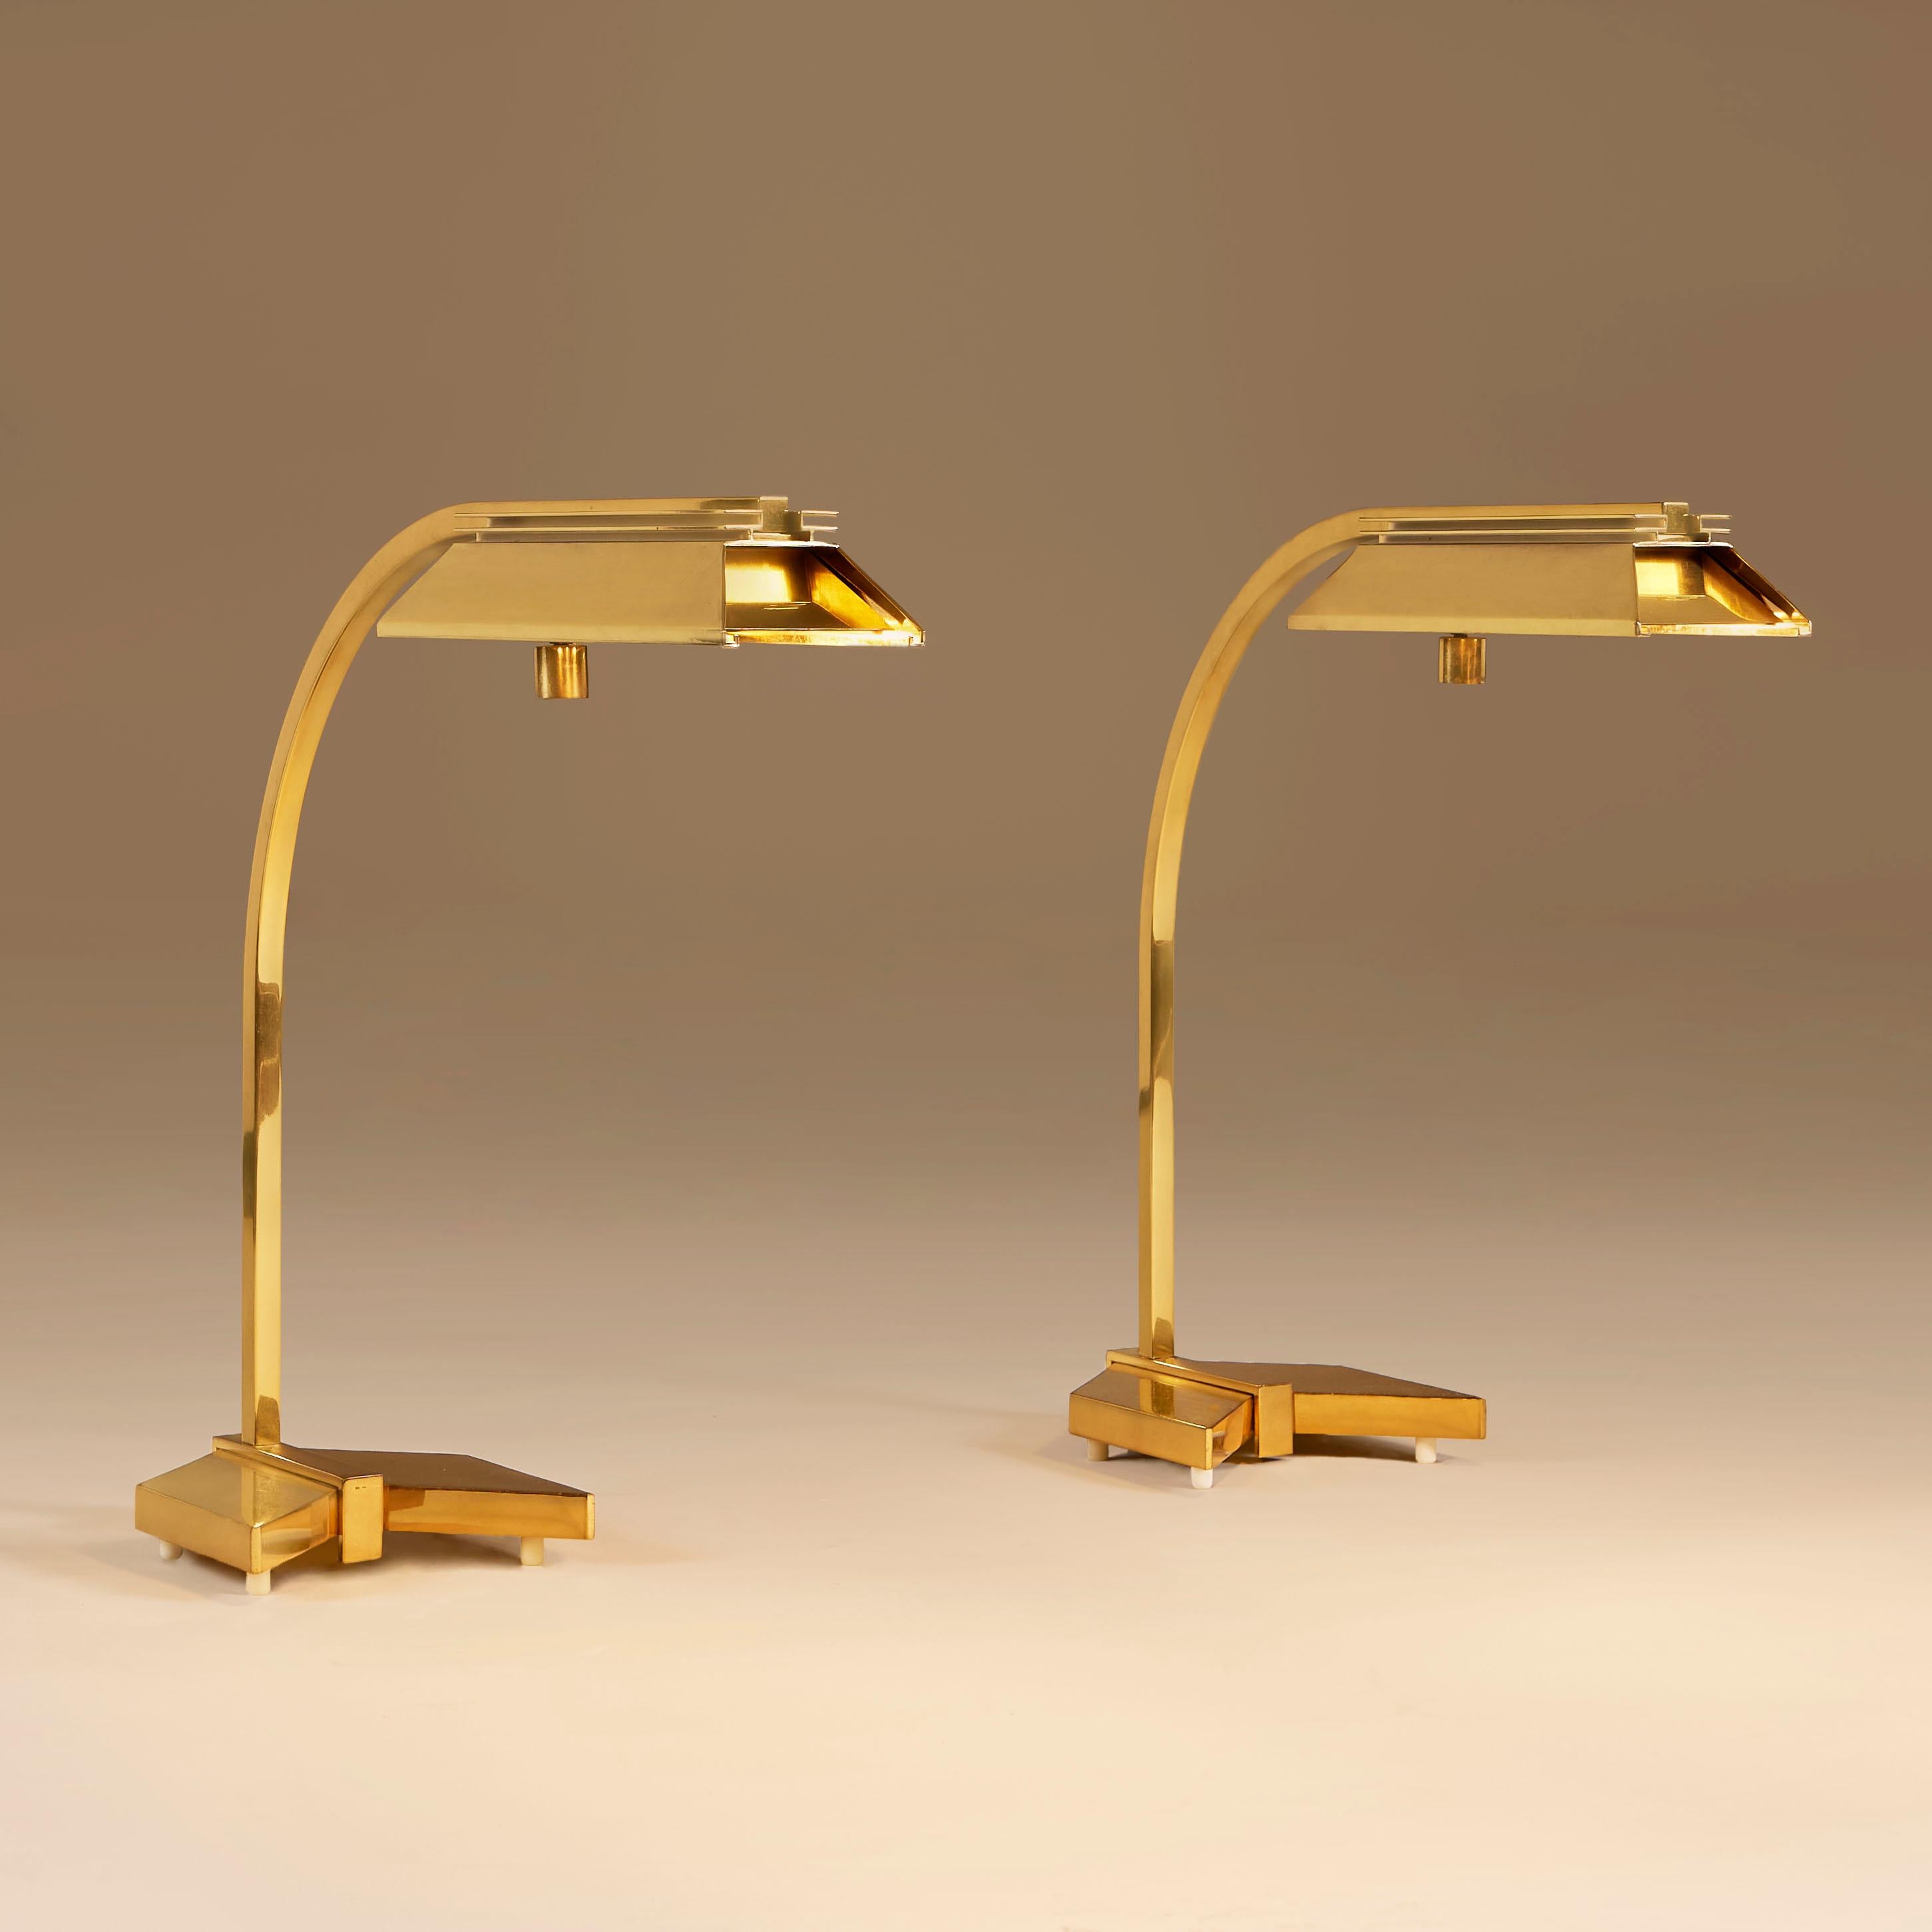 Chic and substantial brushed brass desk lamp with decorative arrow shaped base, curved arm and decorative brass shade.

